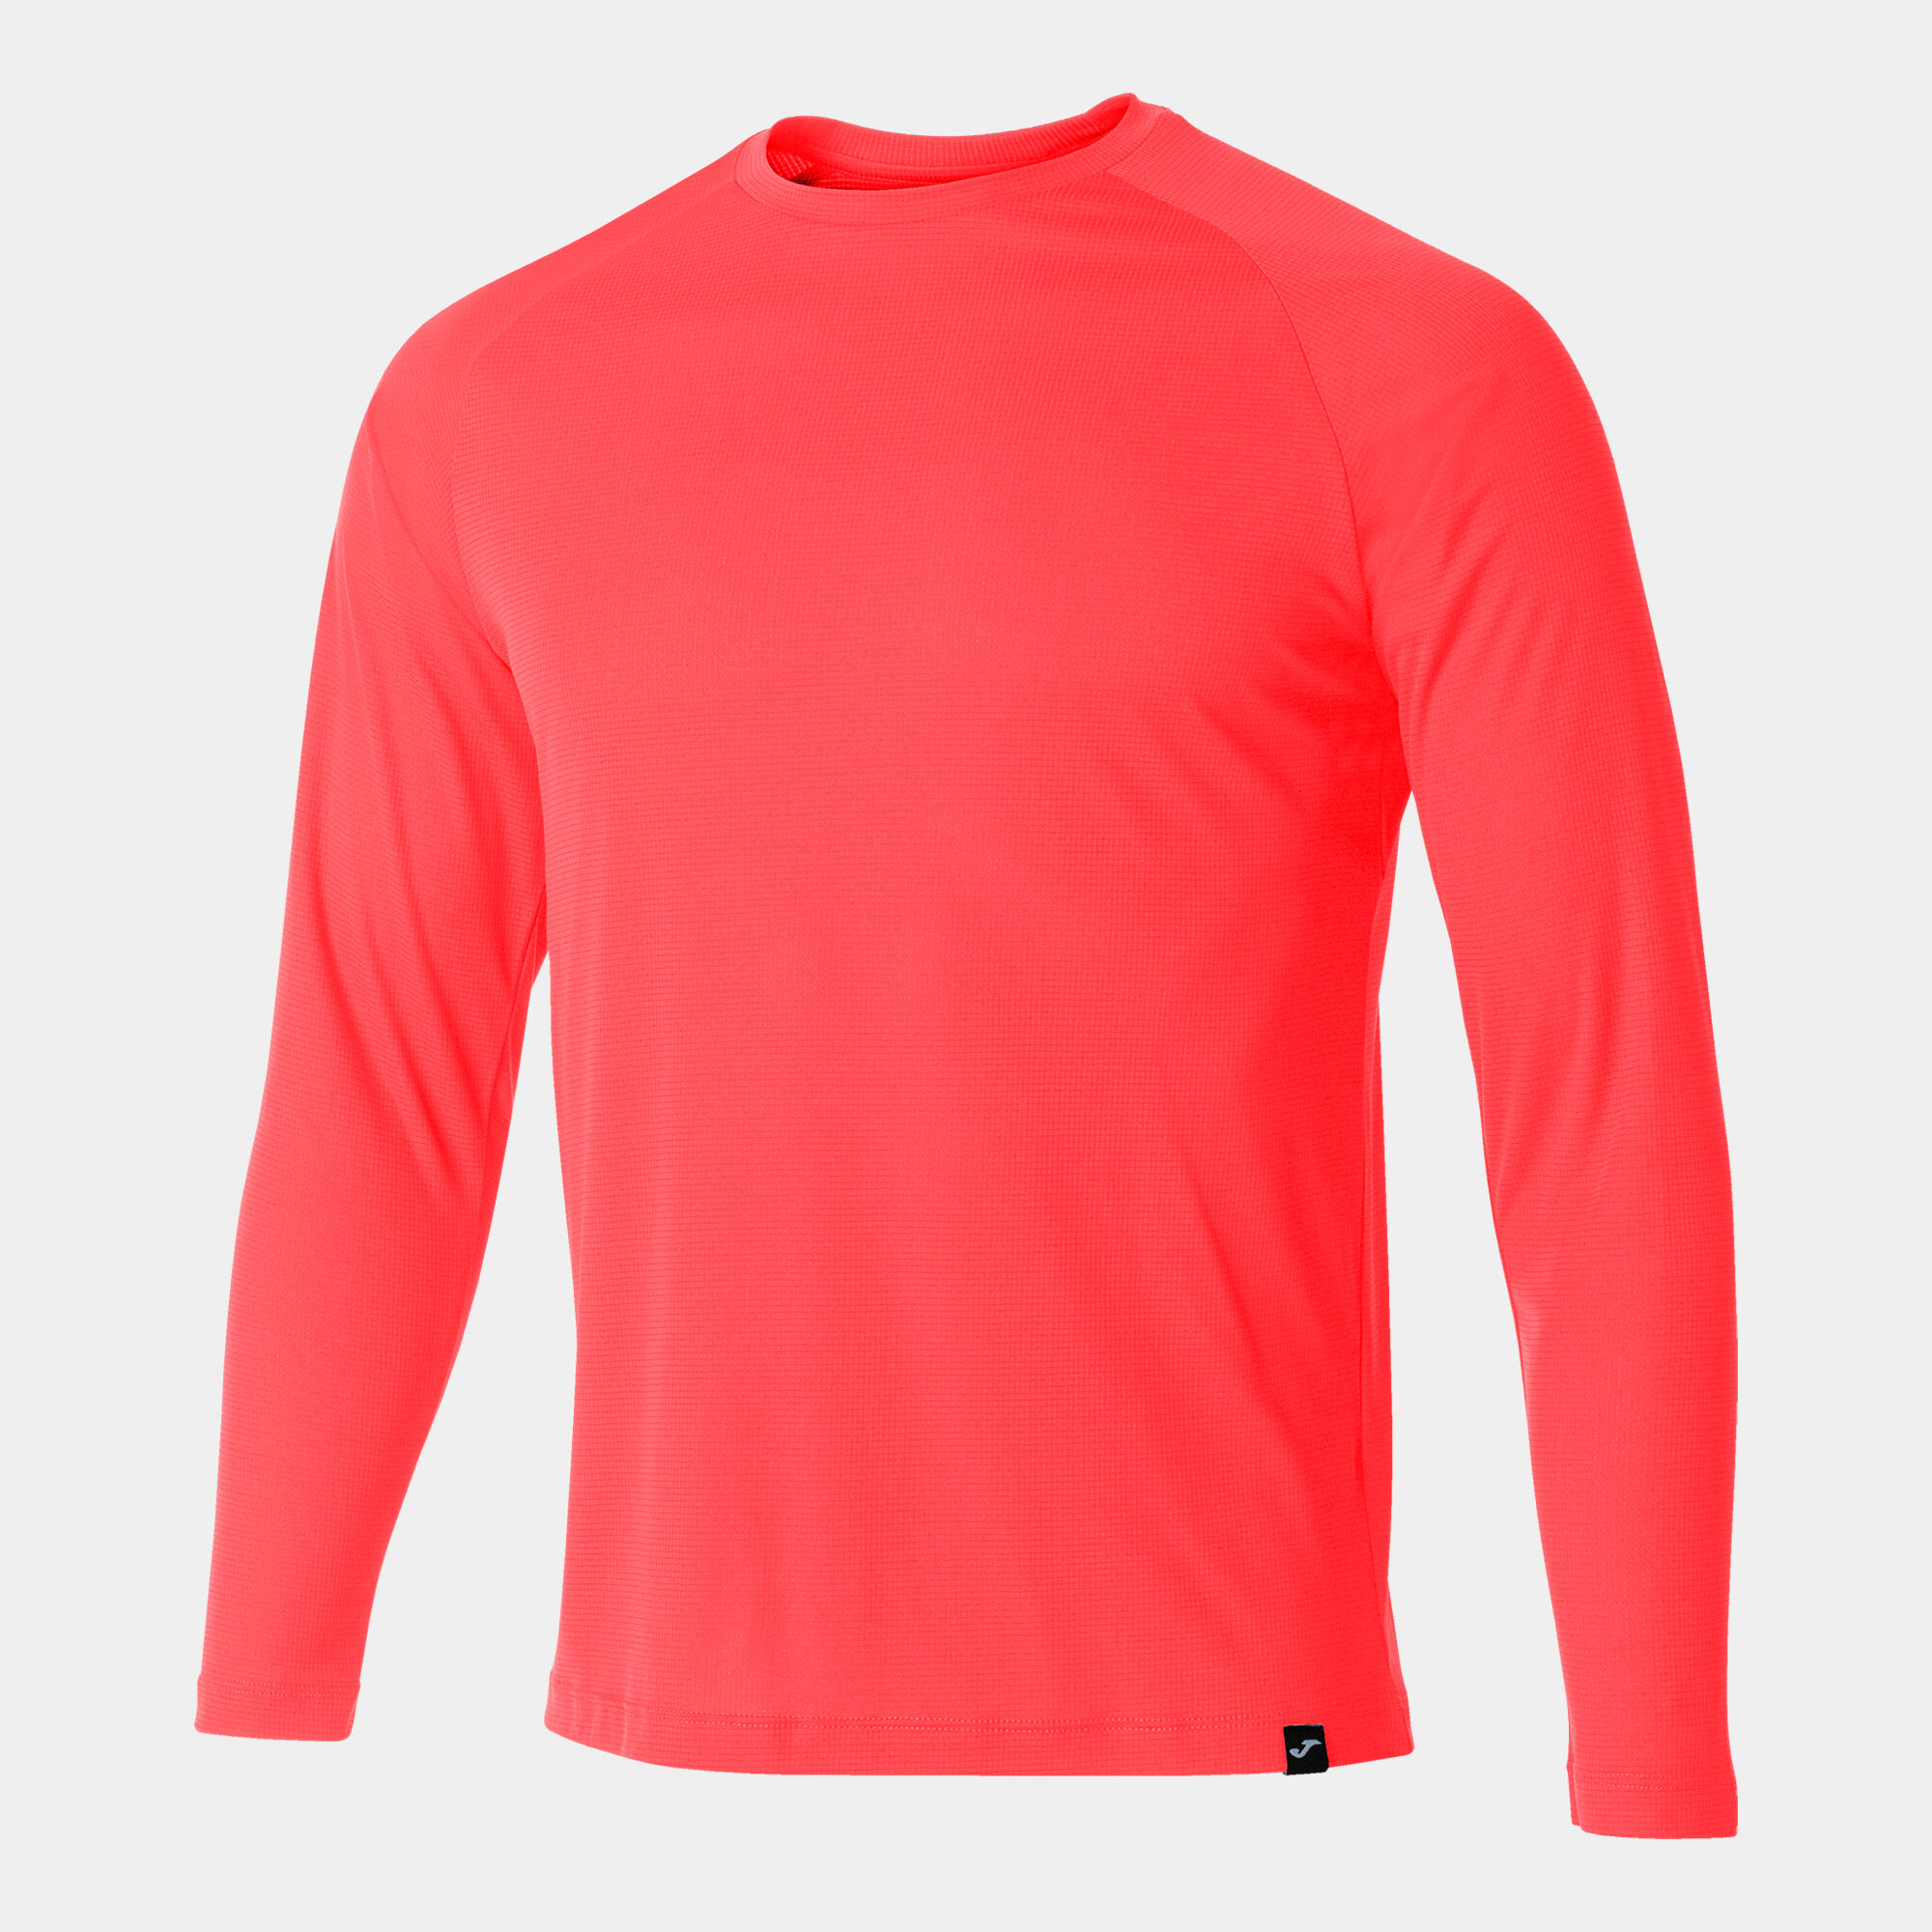 MAILLOT MANCHES LONGUES HOMME R-COMBI CORAIL FLUO